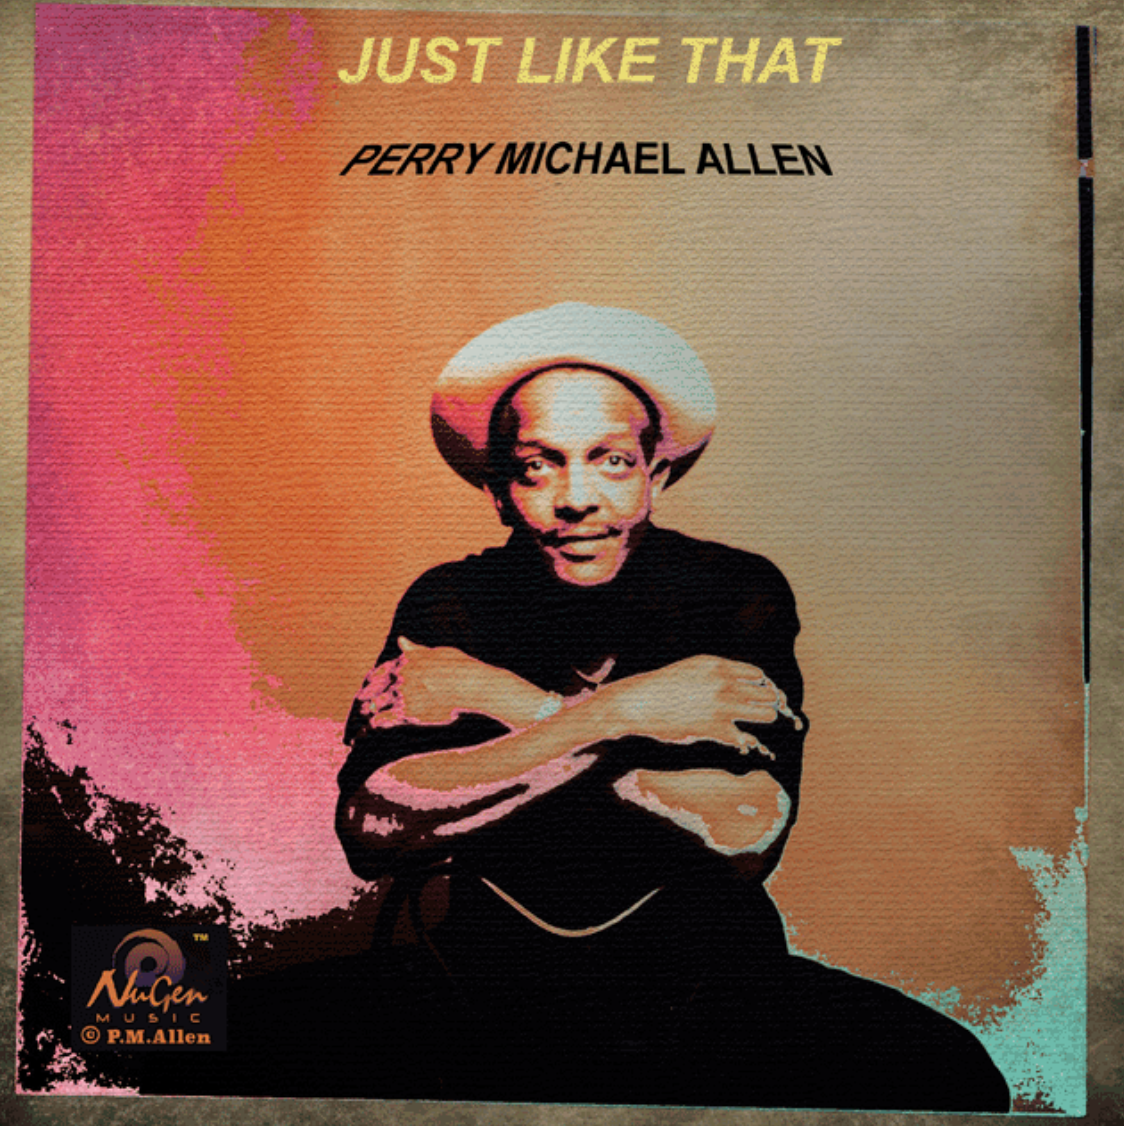 Perry Michael Allen brings us jazzy old-school groove with ‘Just Like That’